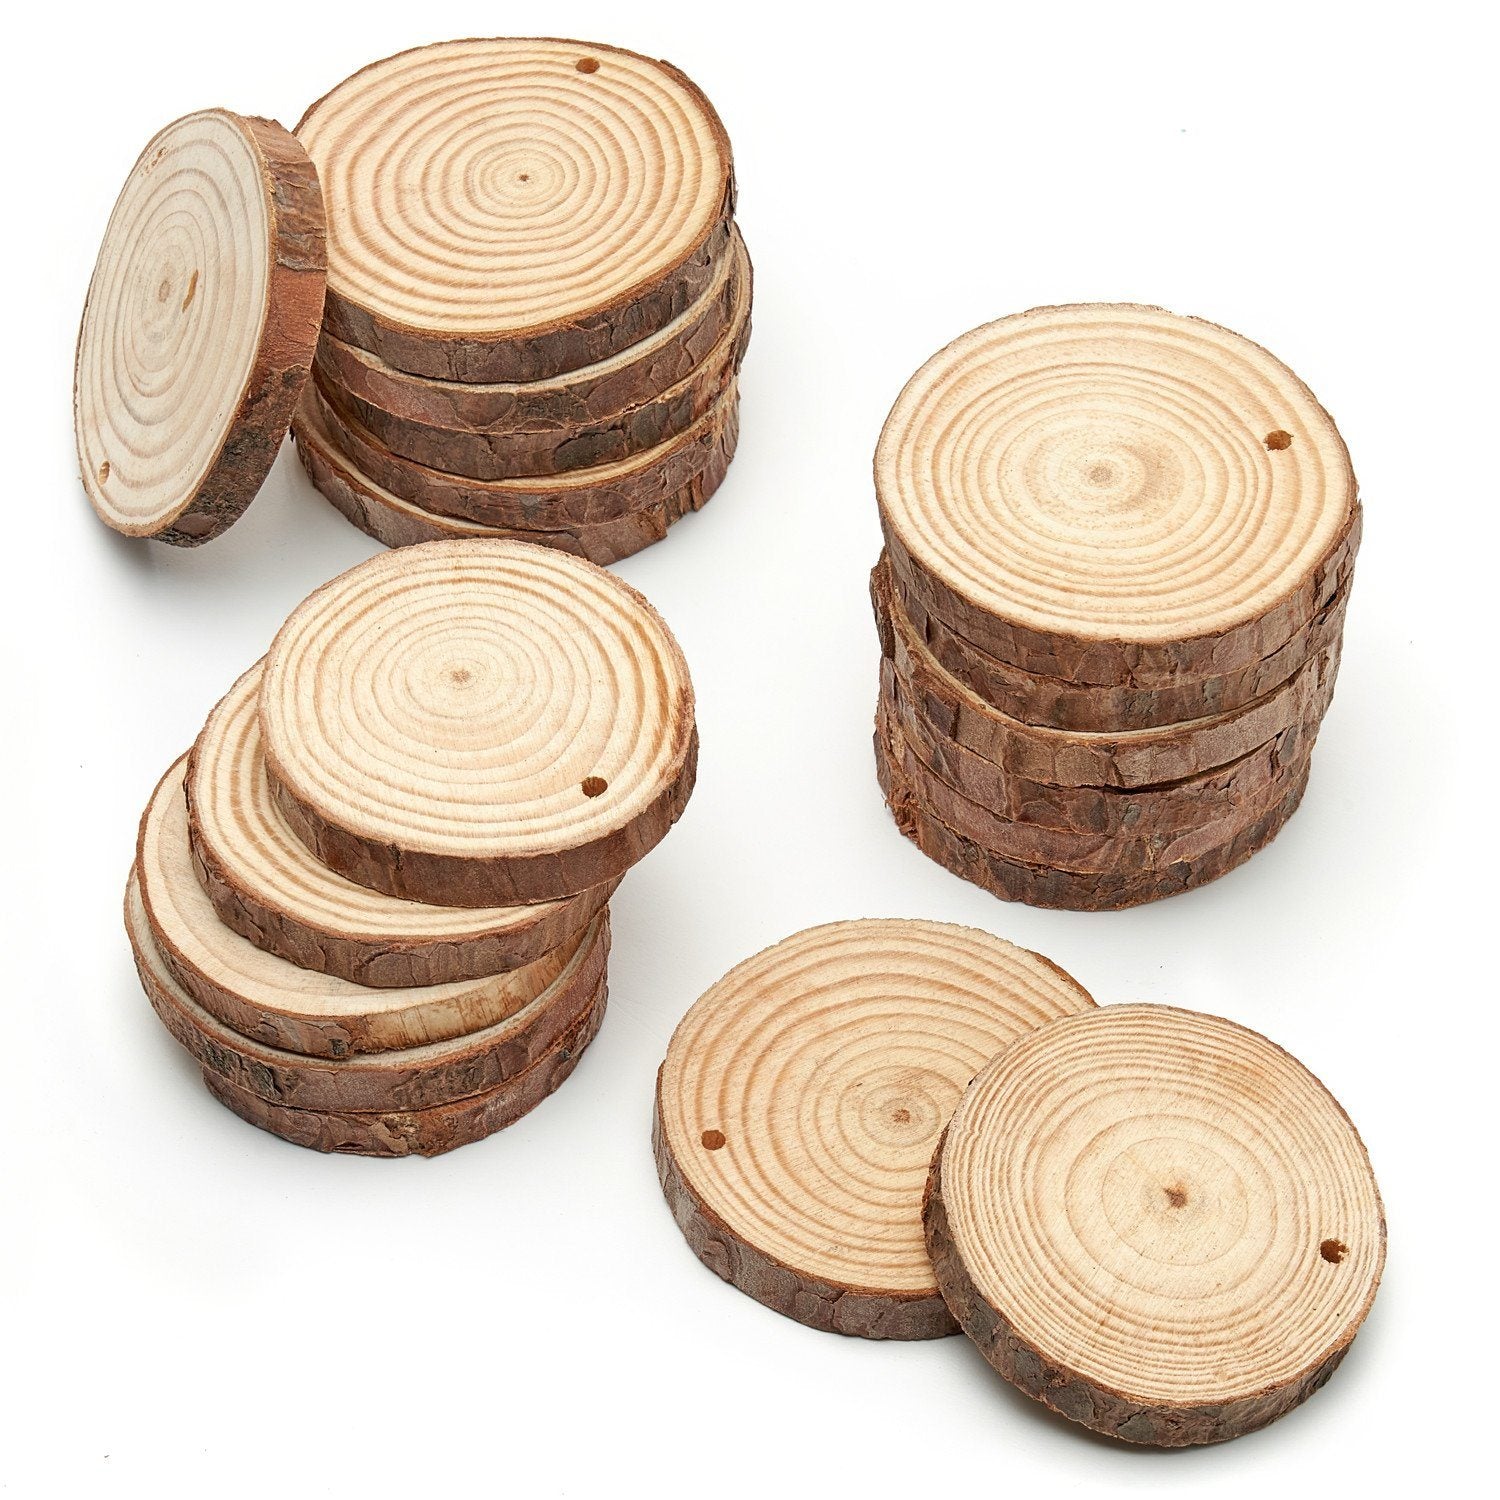  6 Pack Round Rustic Woods Slices, 7-8,Great for